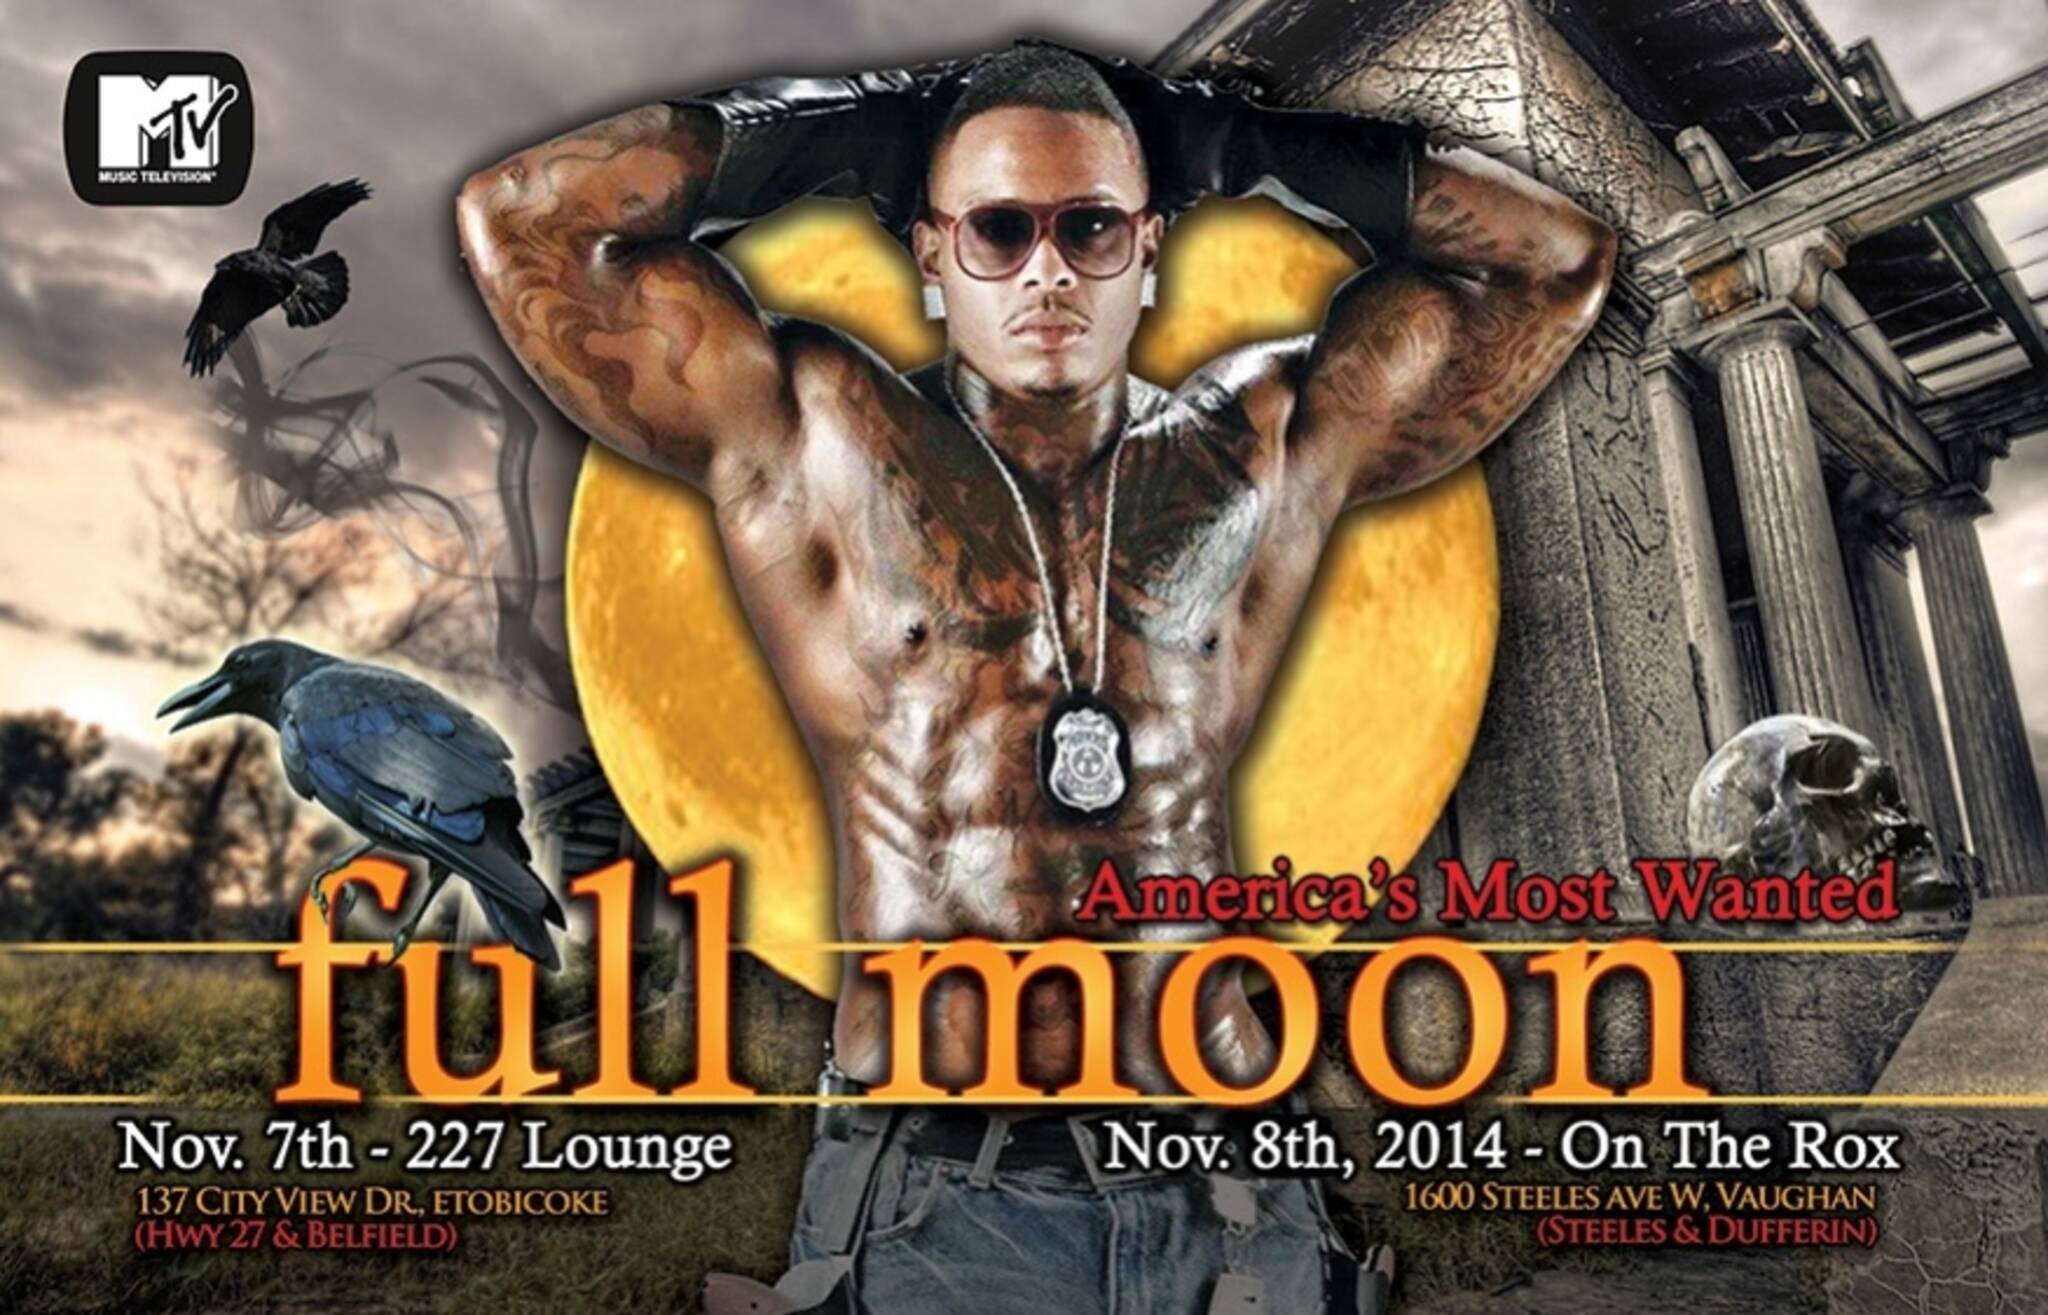 AMERICAS MOST WANTED FULL MOON WEEKEND TOUR